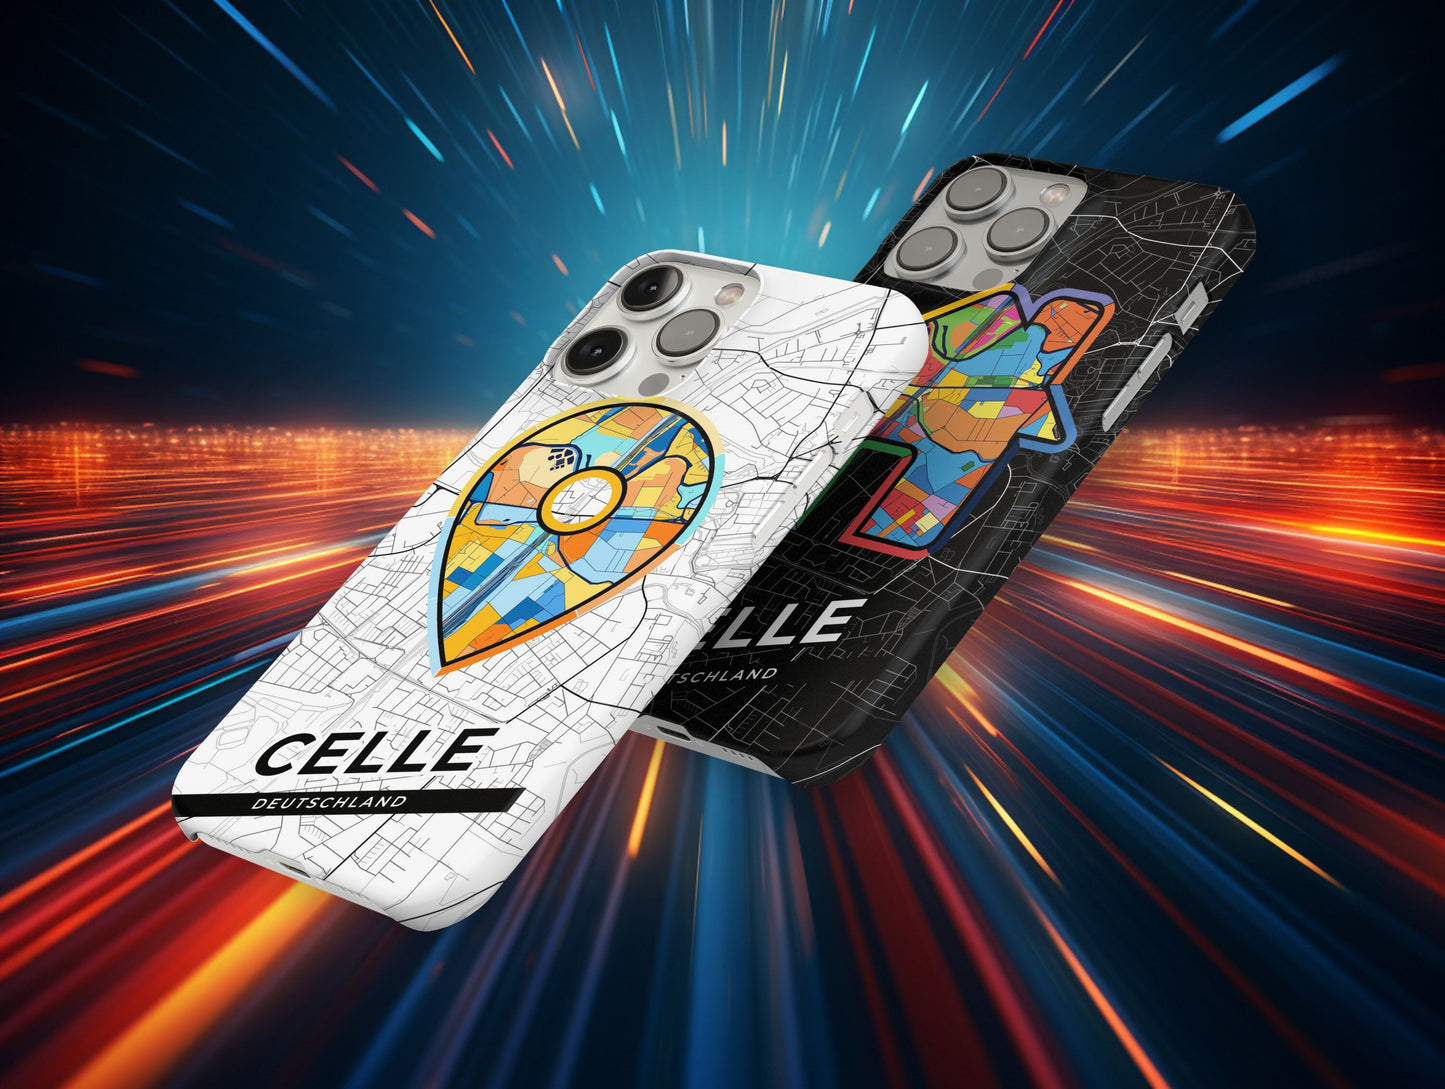 Celle Deutschland slim phone case with colorful icon. Birthday, wedding or housewarming gift. Couple match cases.